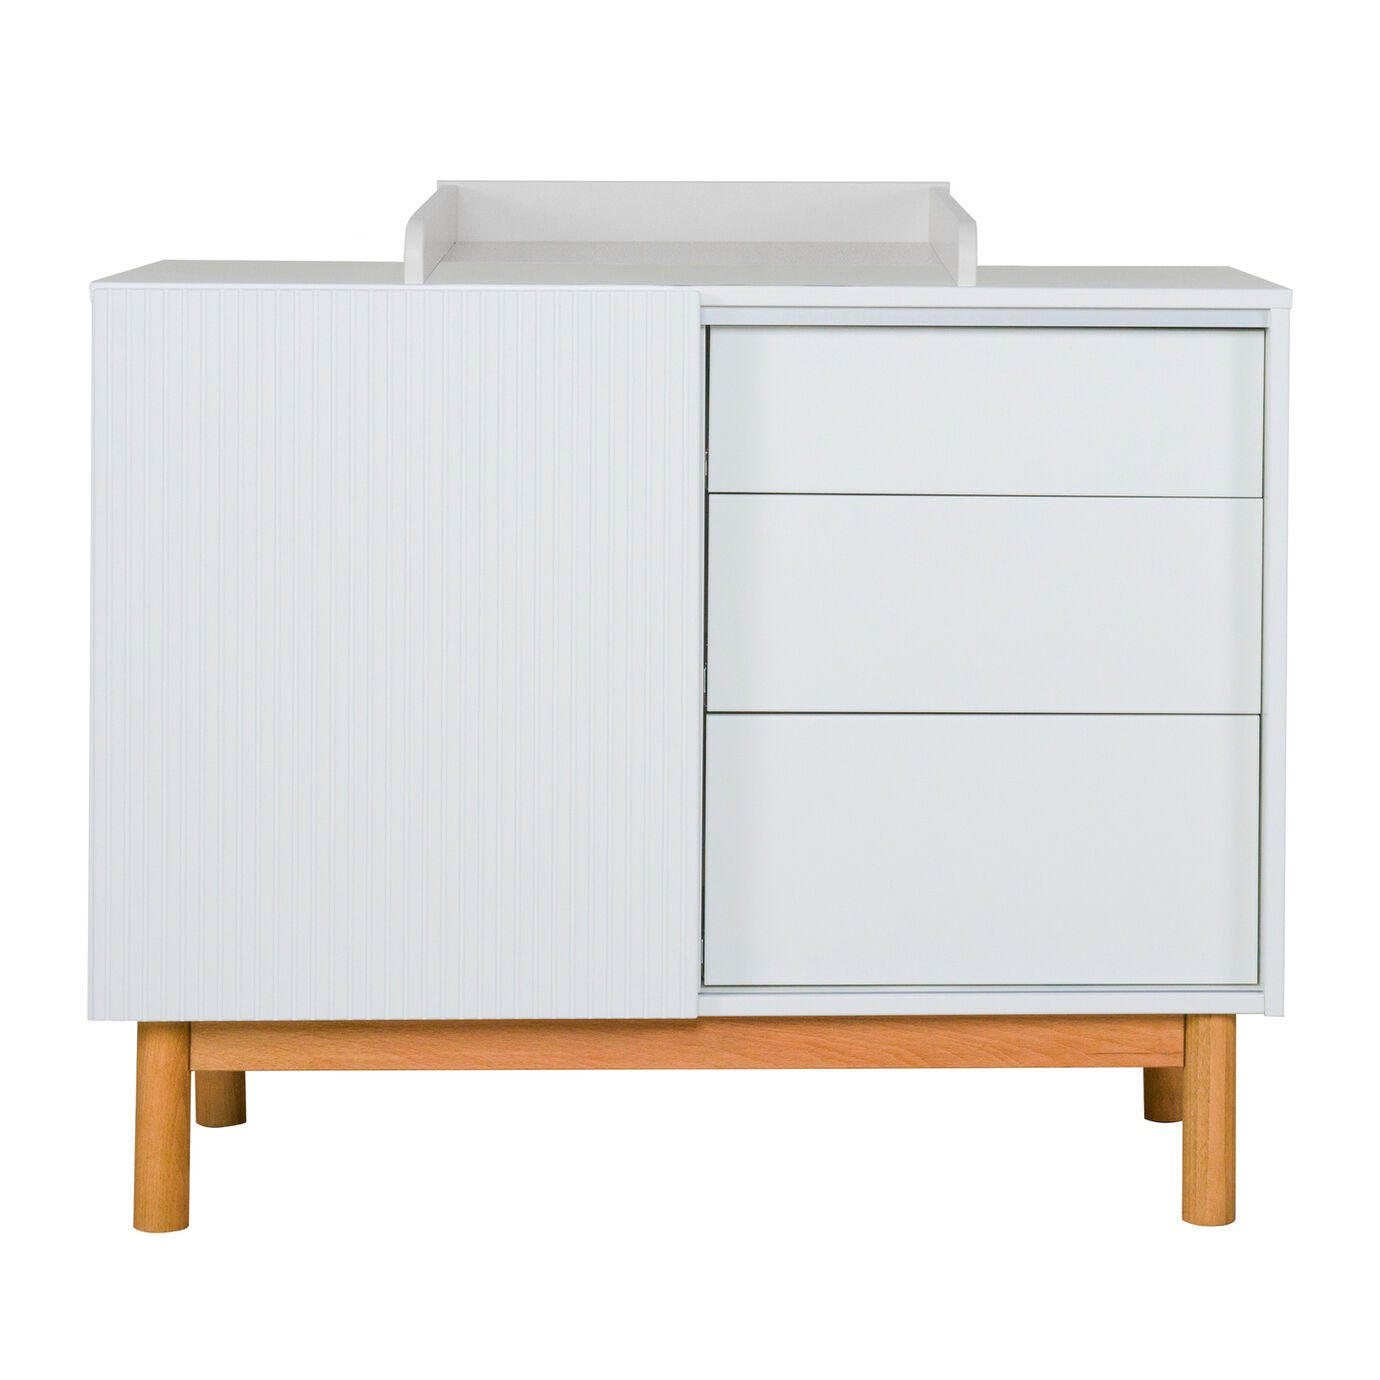 Quax Mood Opzetstuk (Barrier– Exclusief Commode) - White